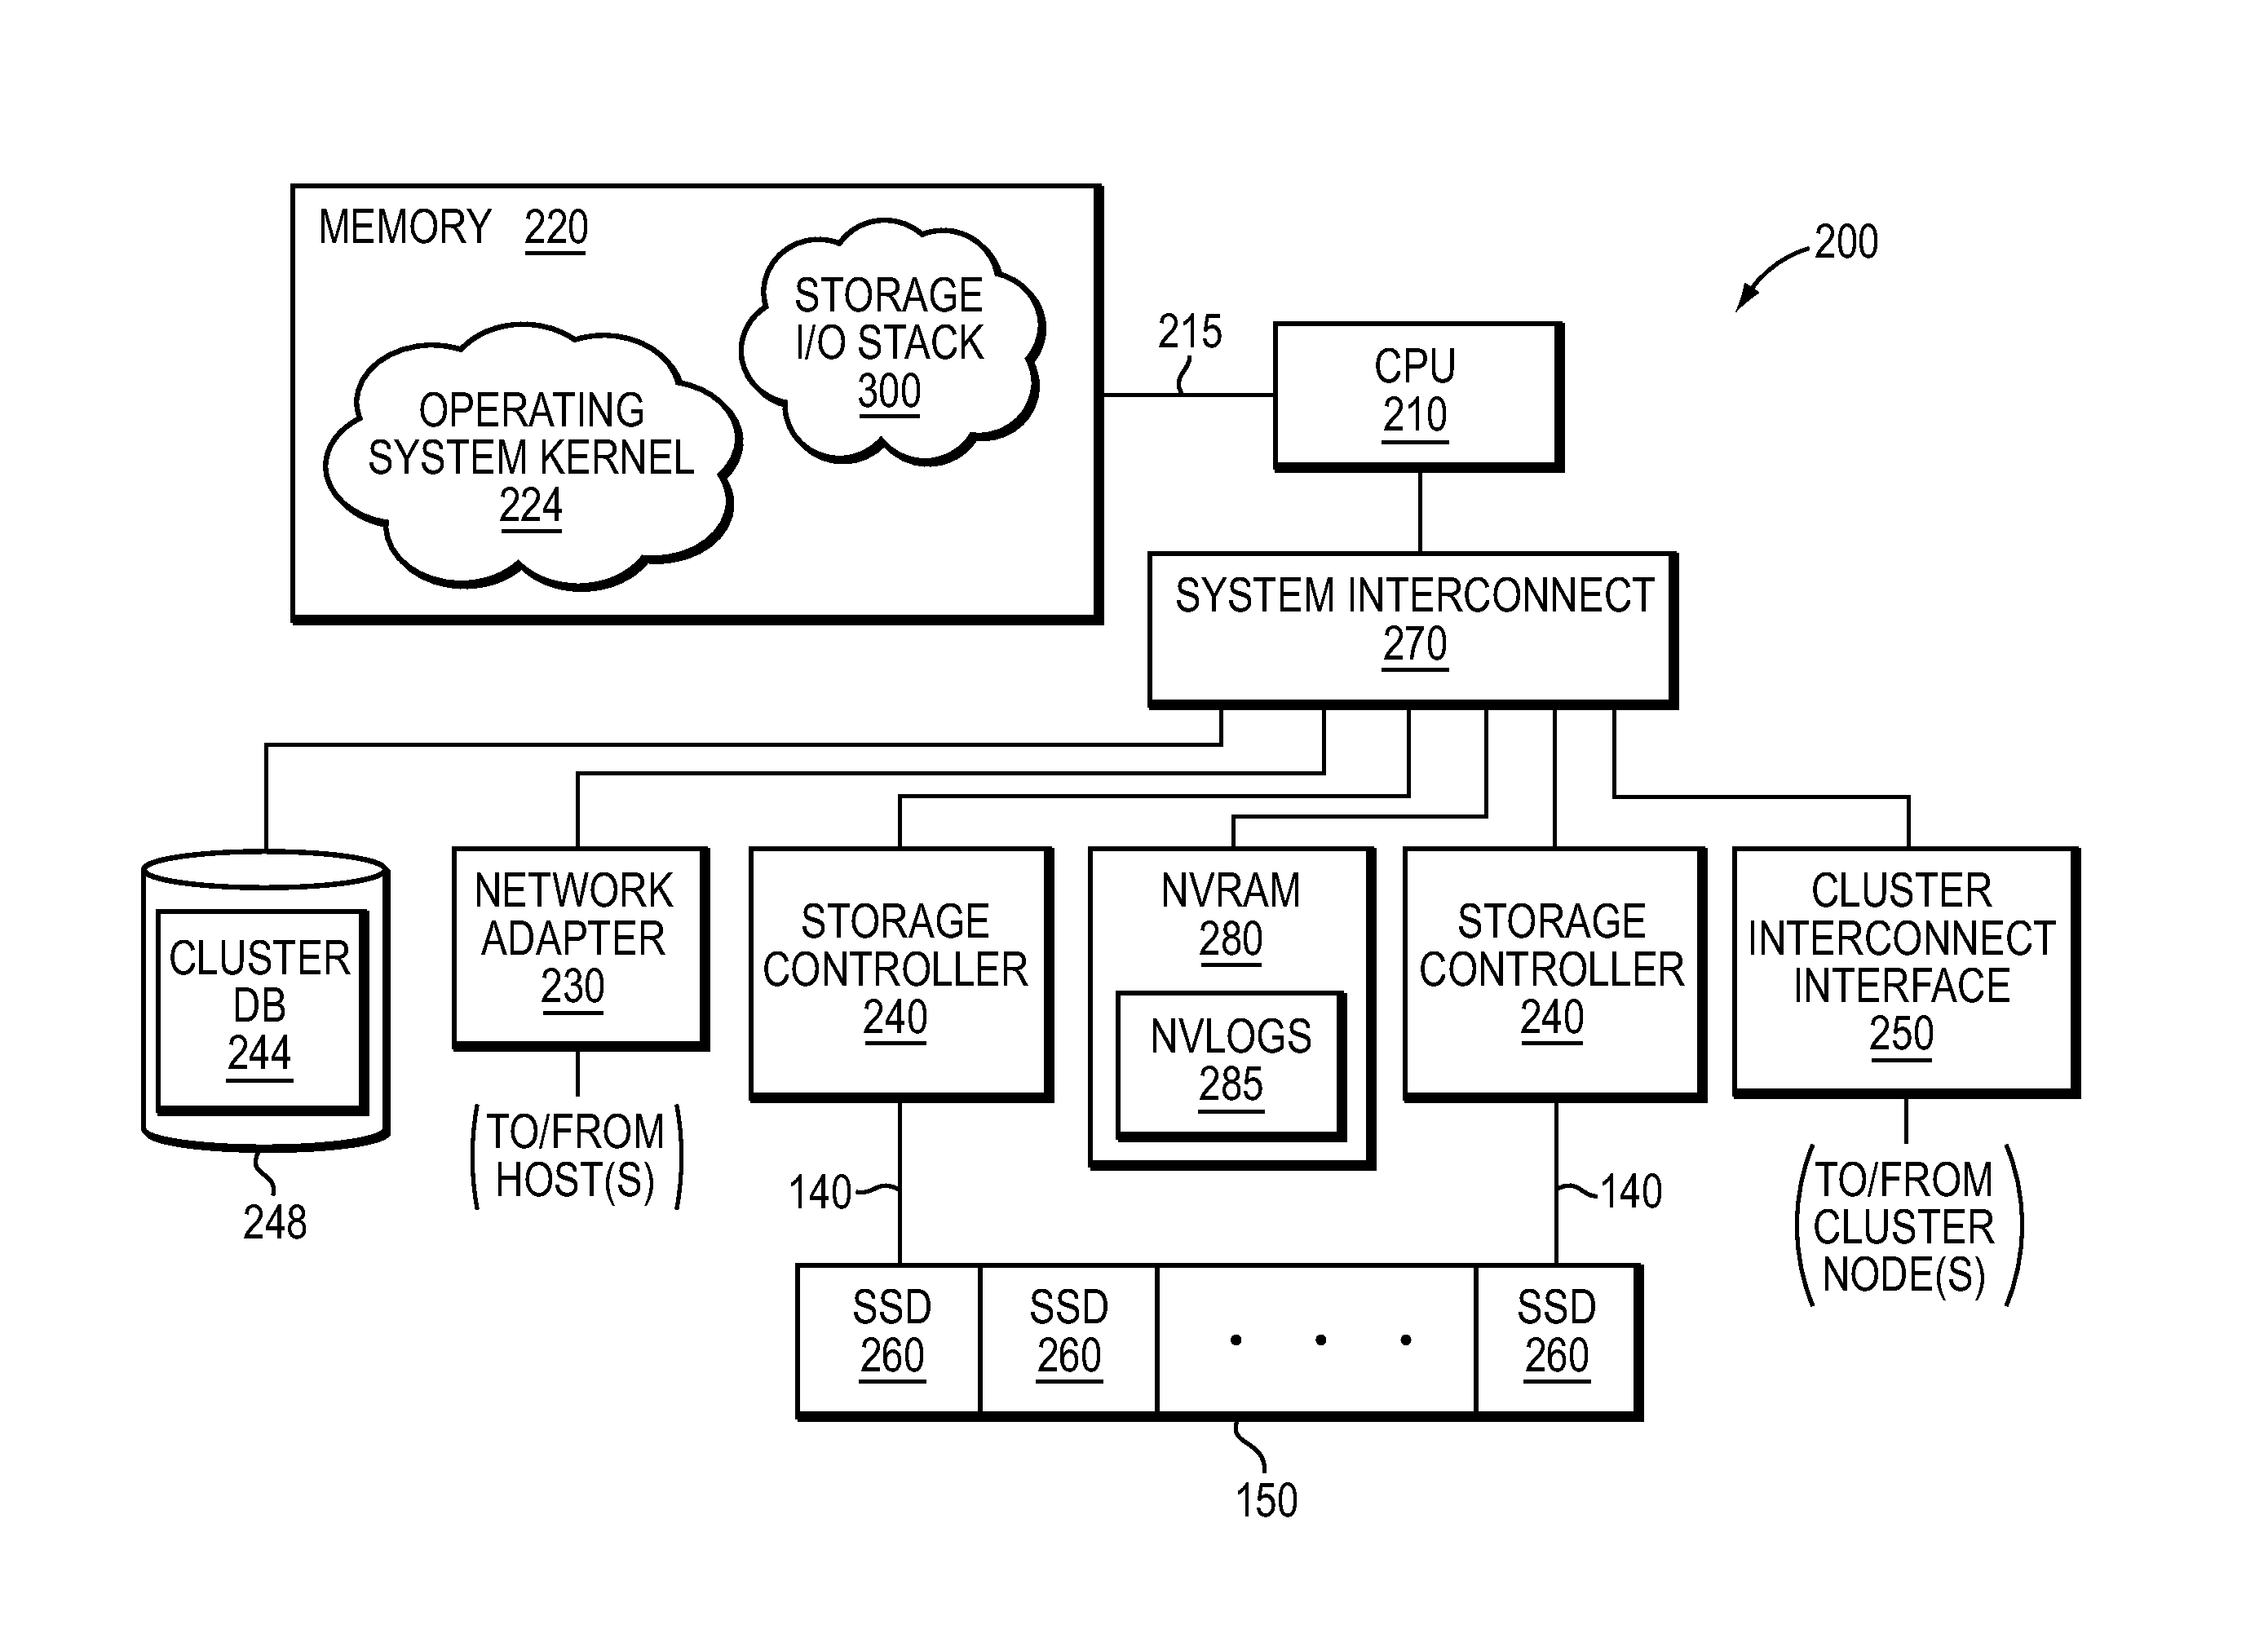 Set-associative hash table organization for efficient storage and retrieval of data in a storage system